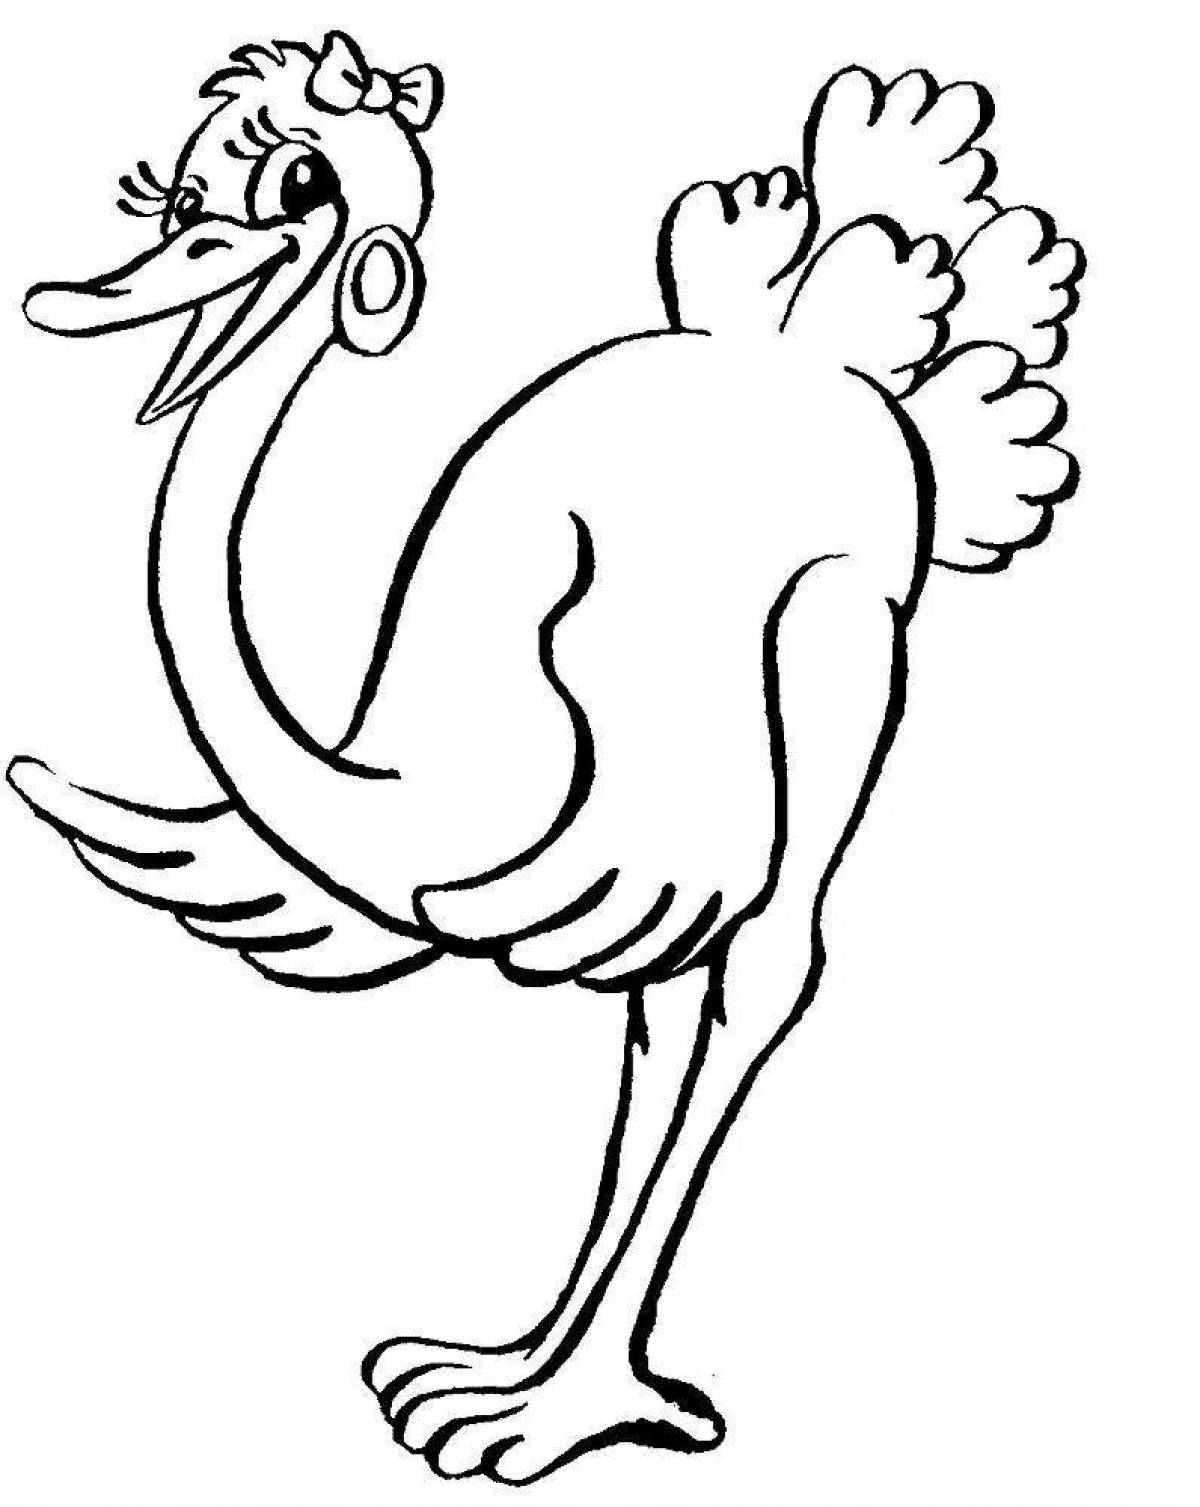 Playful ostrich coloring page for kids